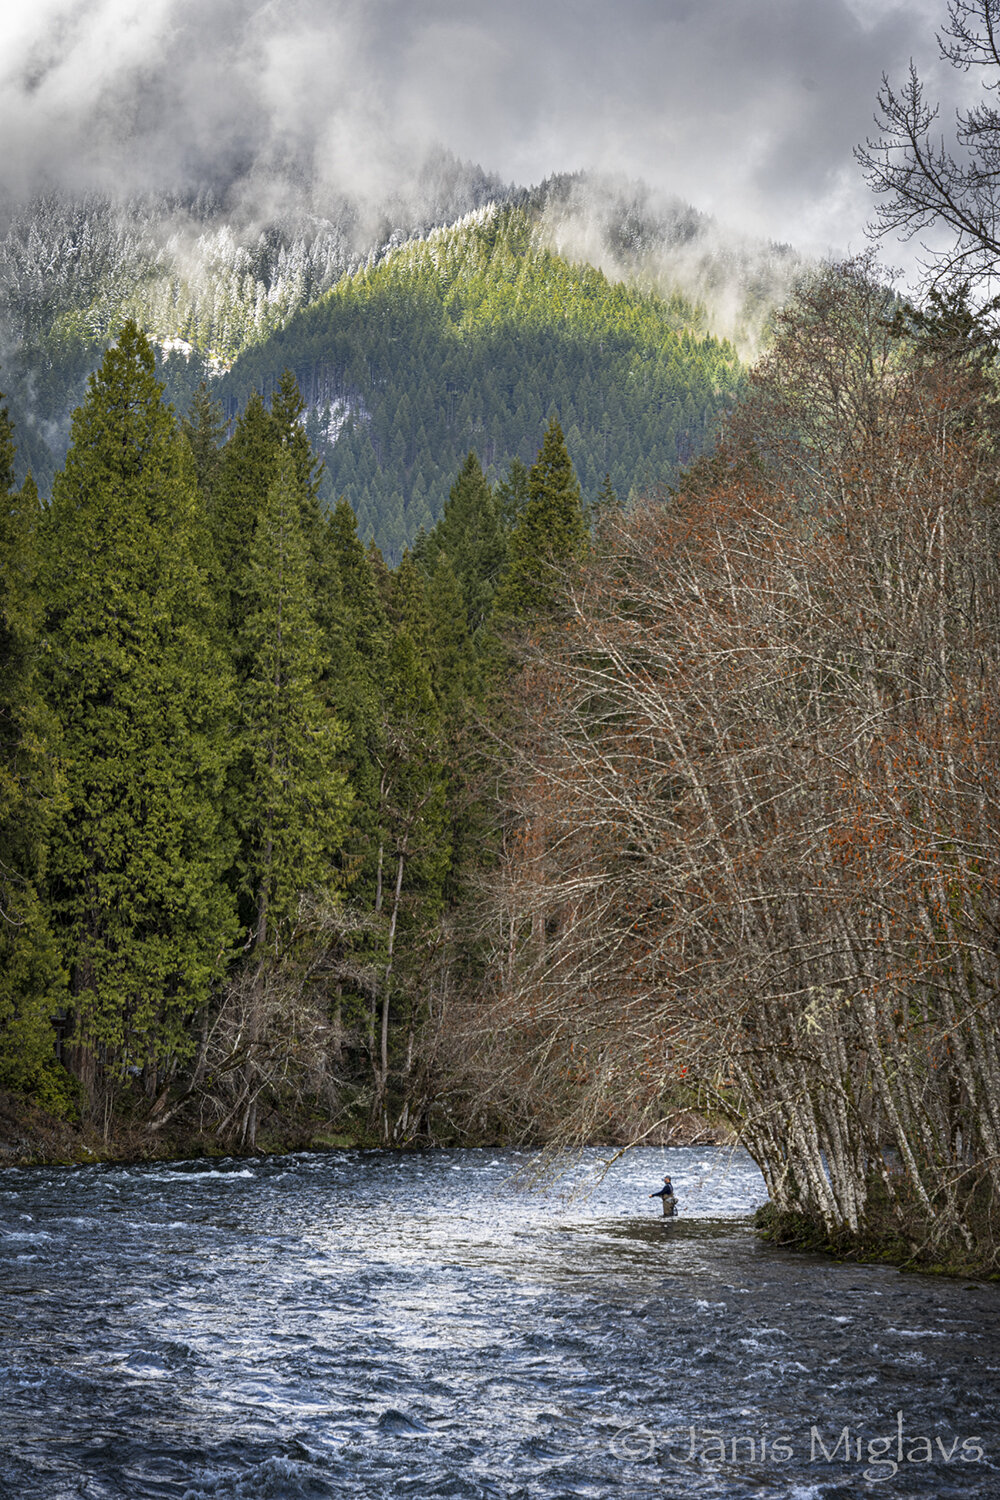 Early Spring fishing on Oregon's McKenzie River